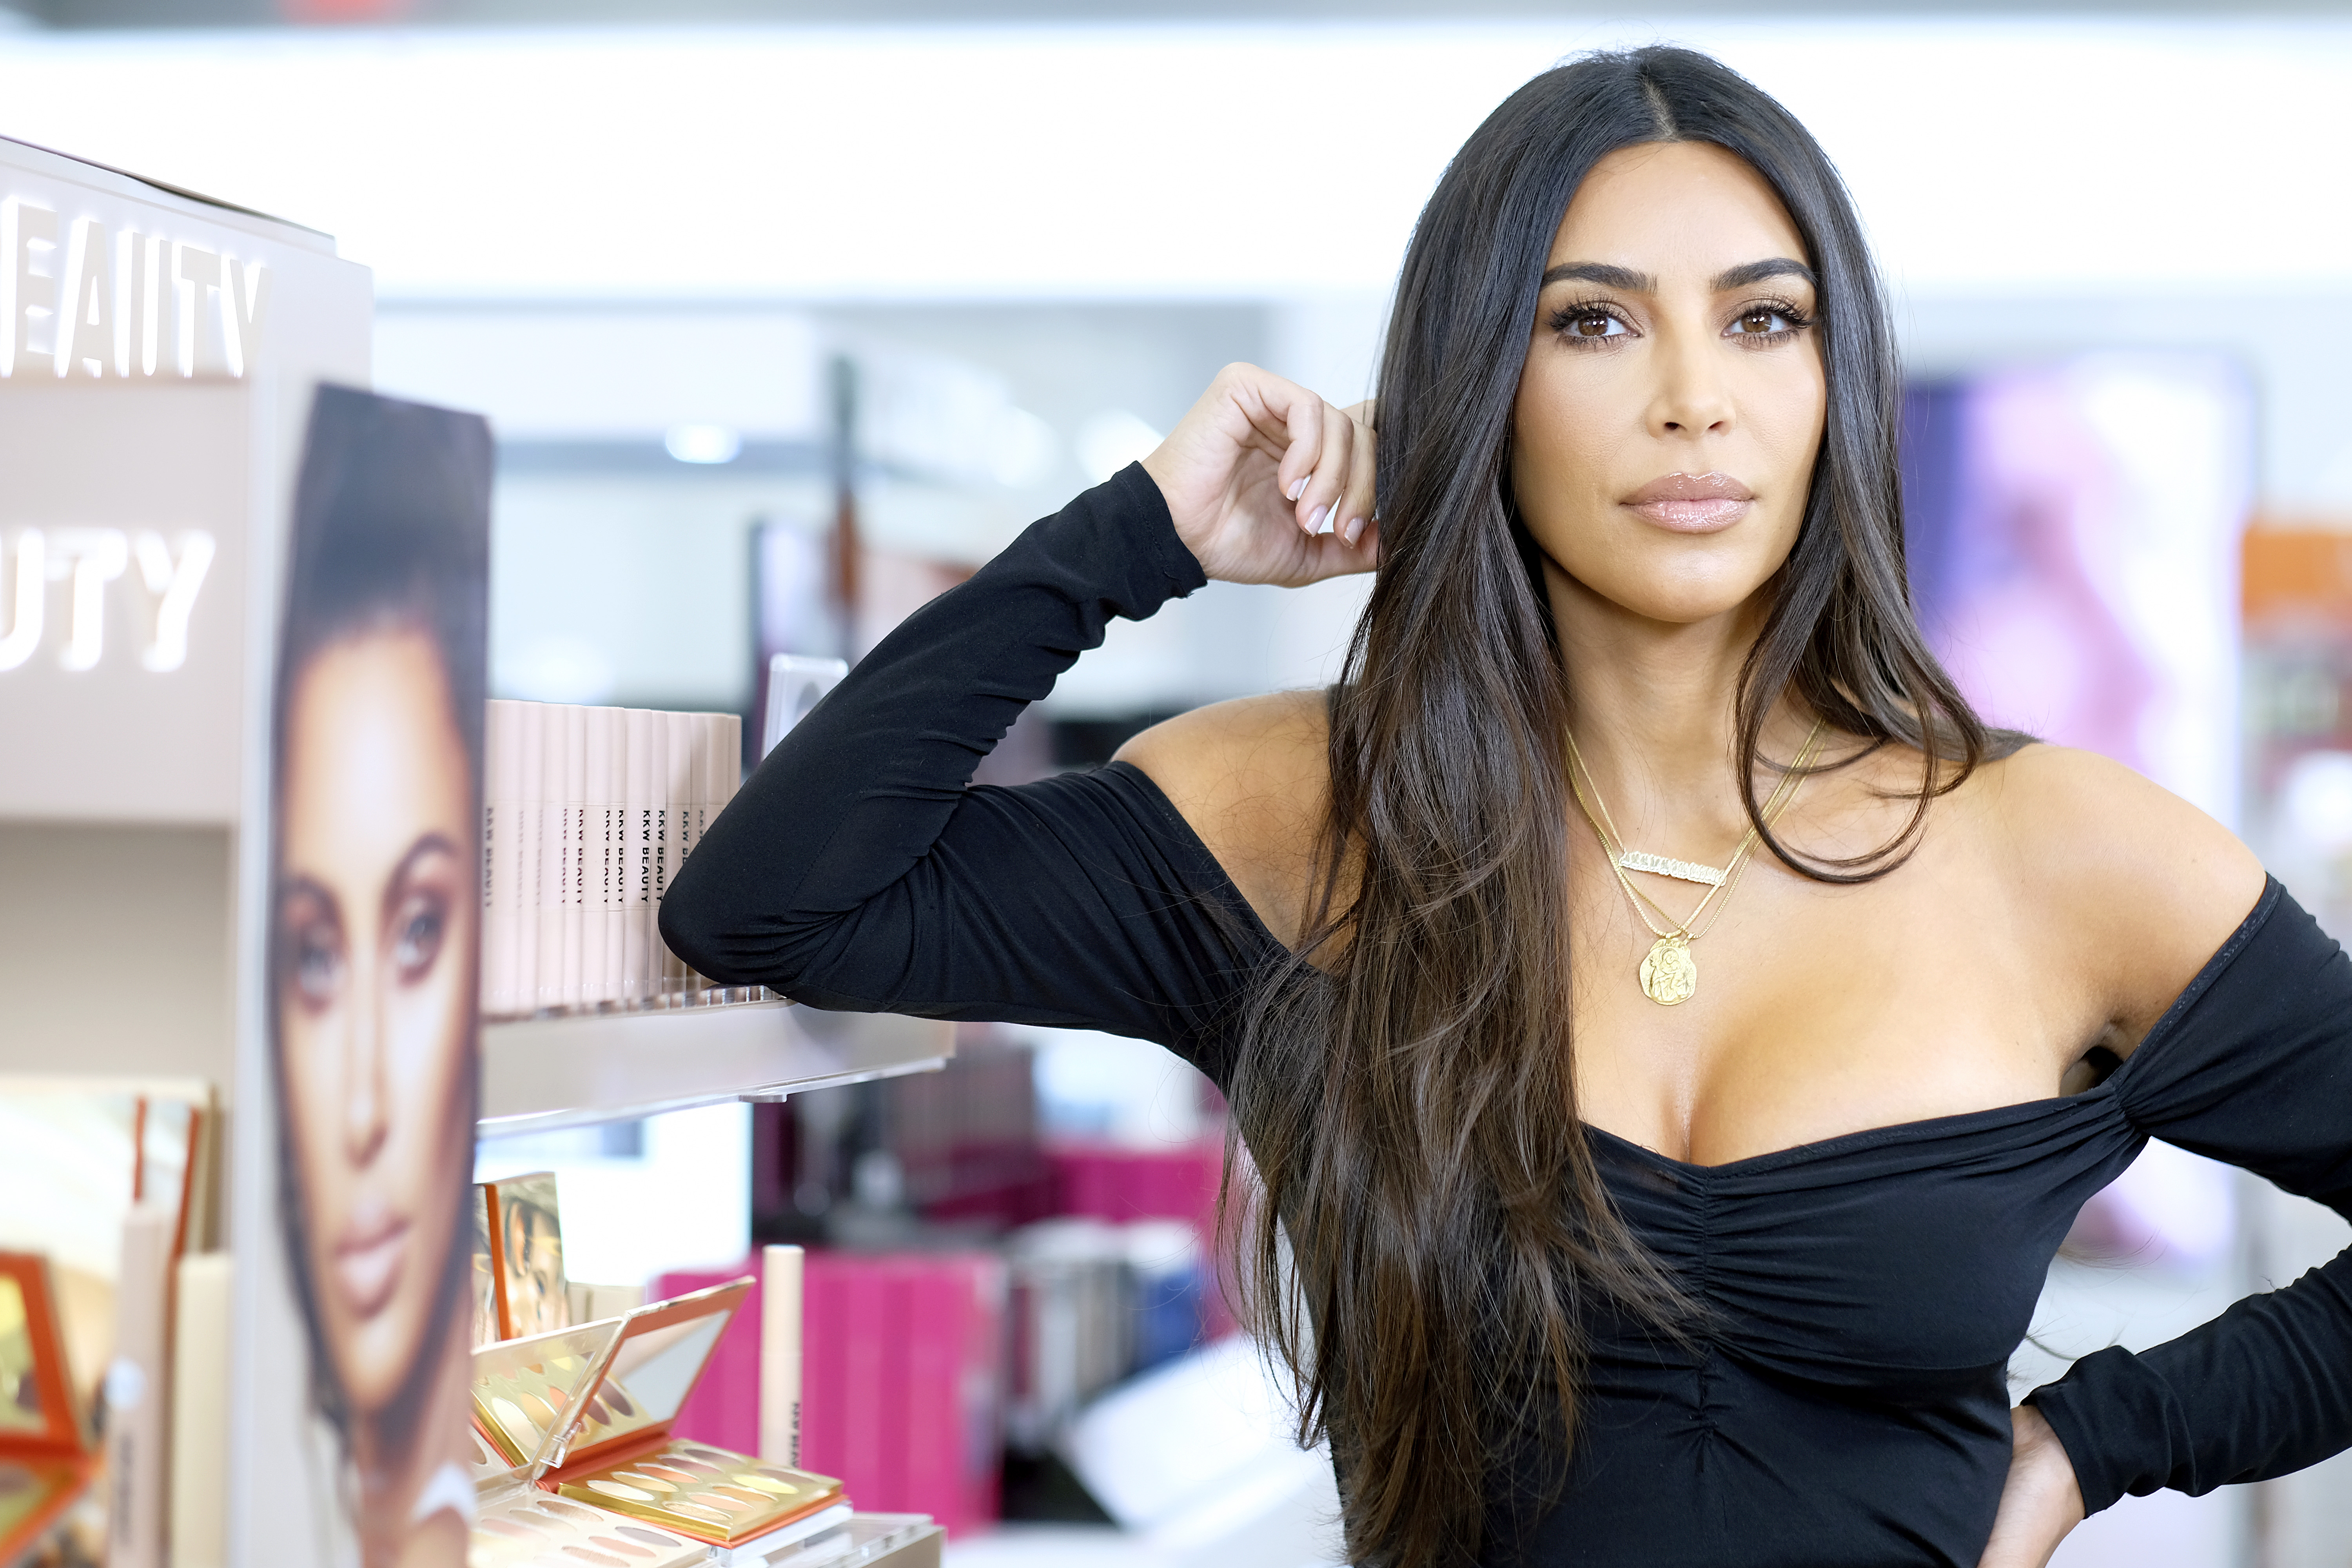 Kim Kardashian Says She Had Five Operations To “Fix The Damage” From Pregnancy